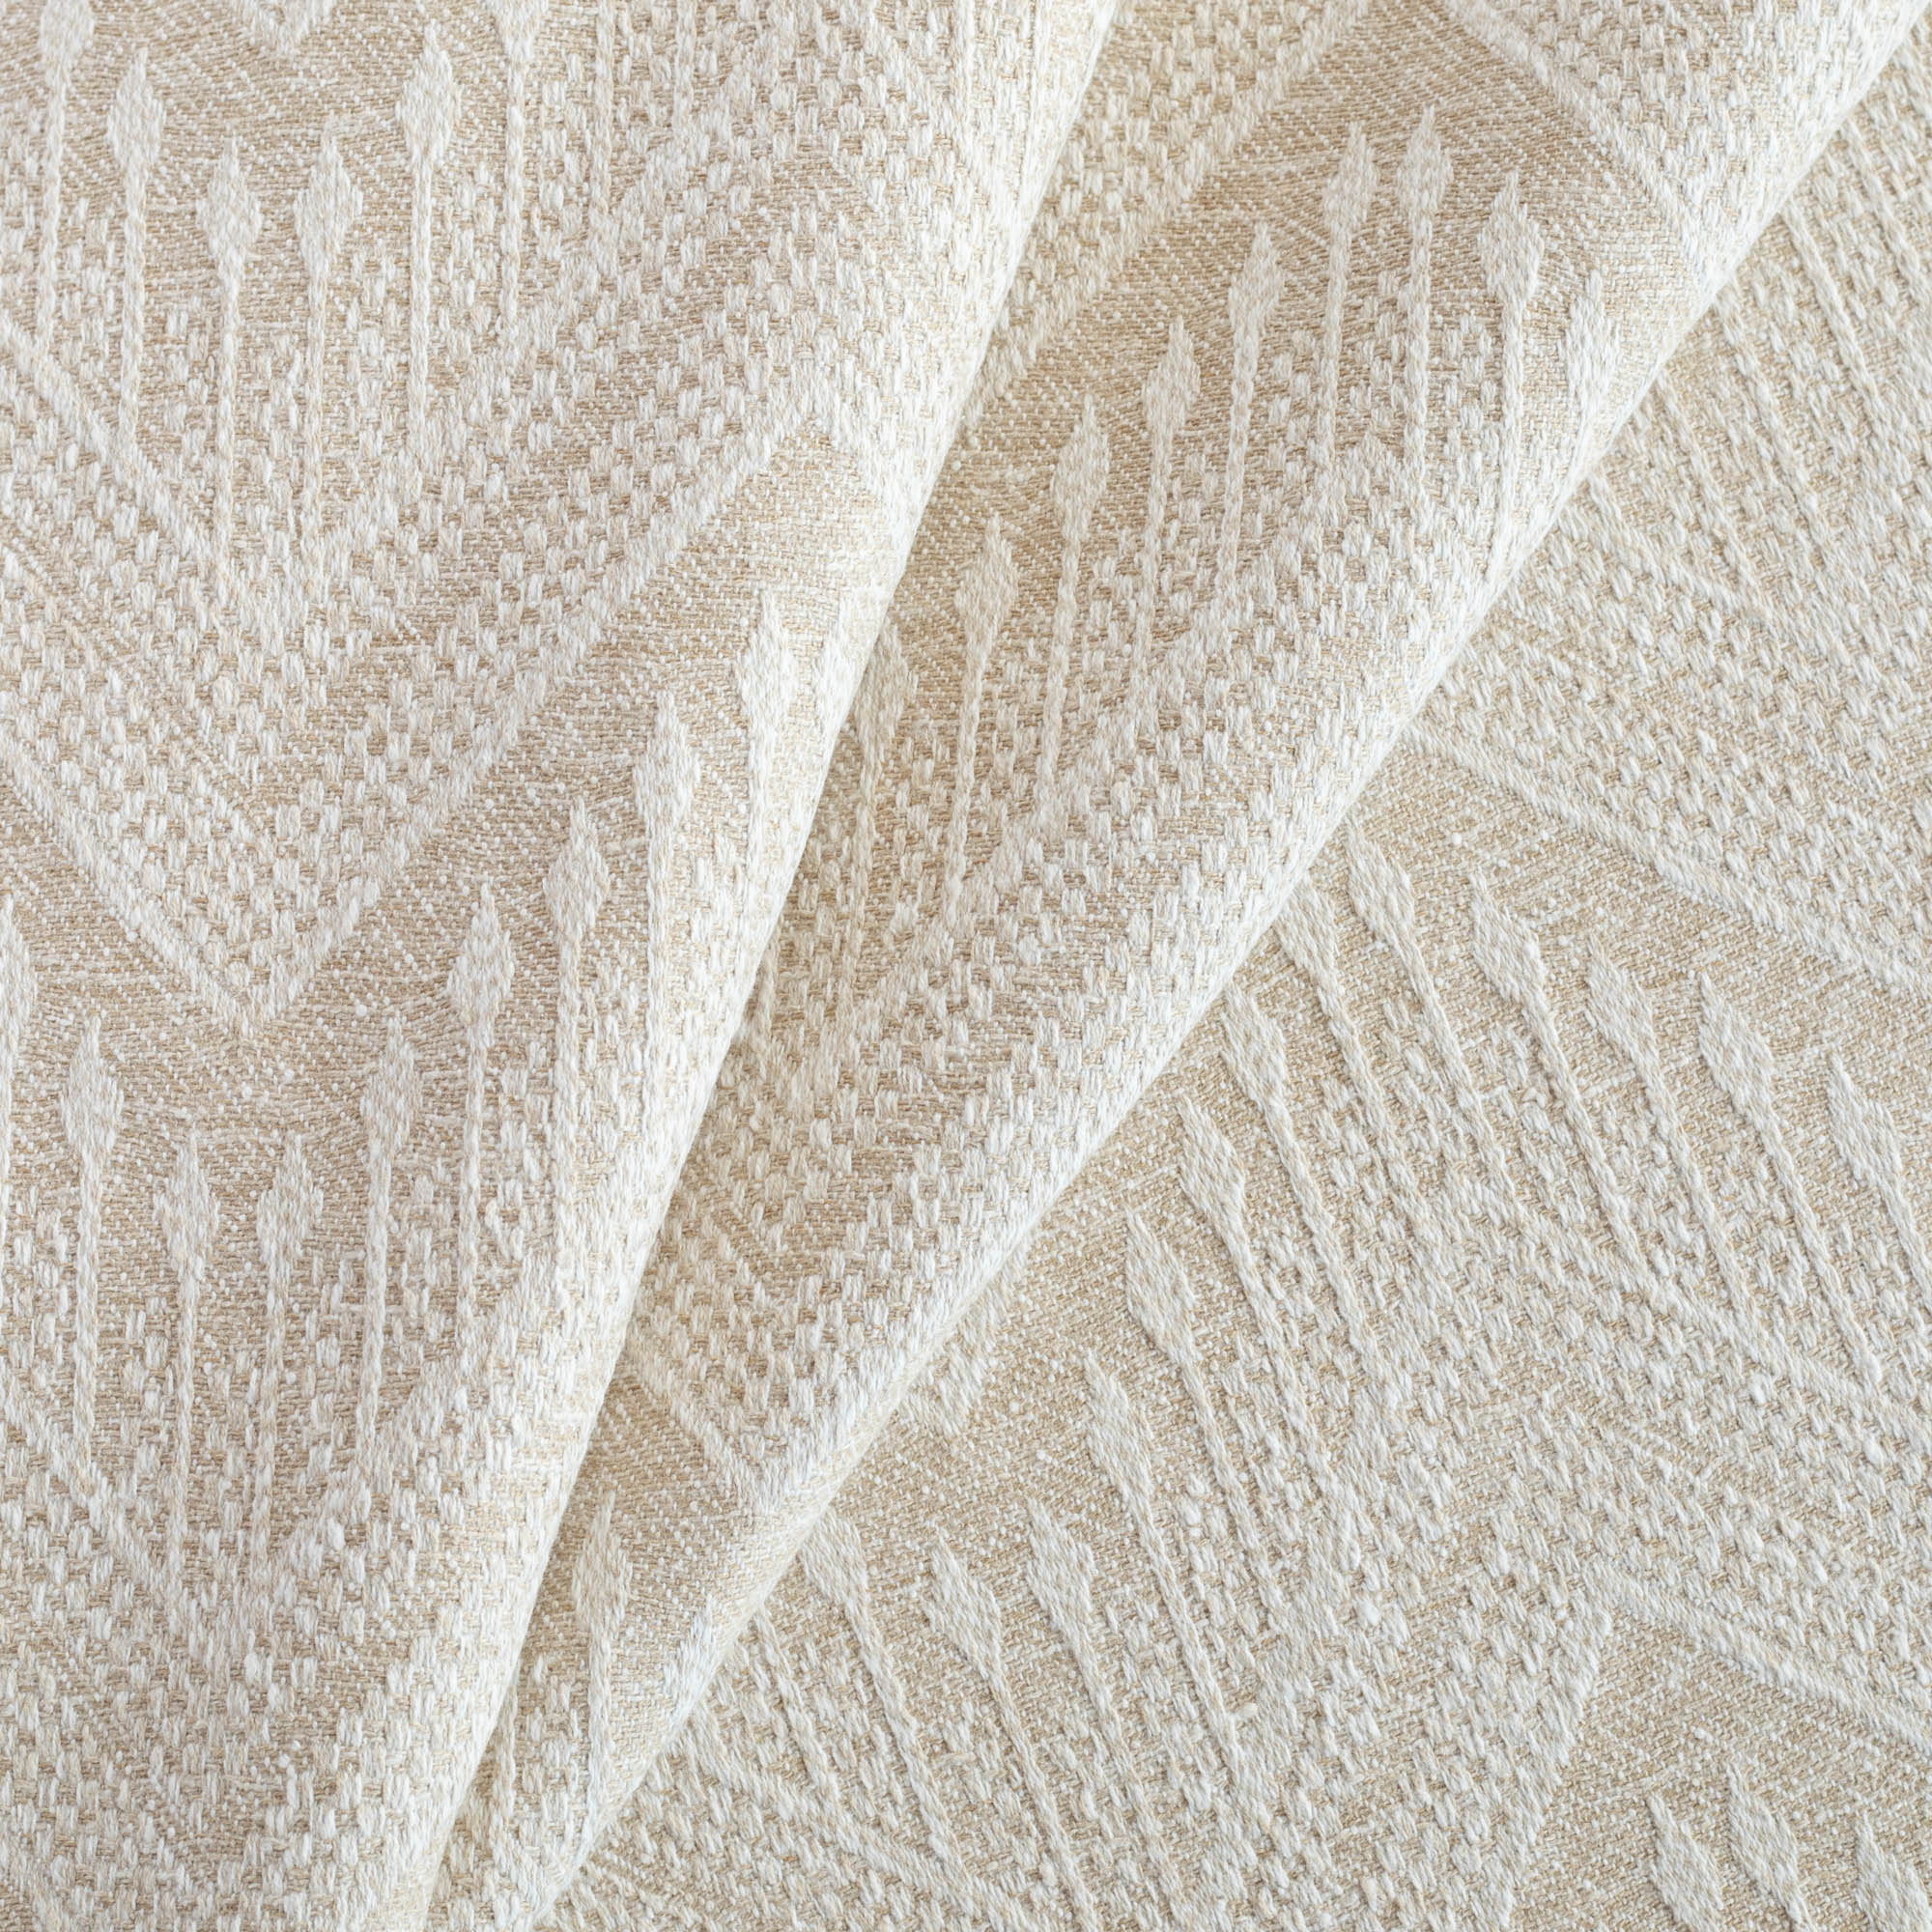 a beige upholstery fabric with a delicate woven white geometric pattern : close up view 2